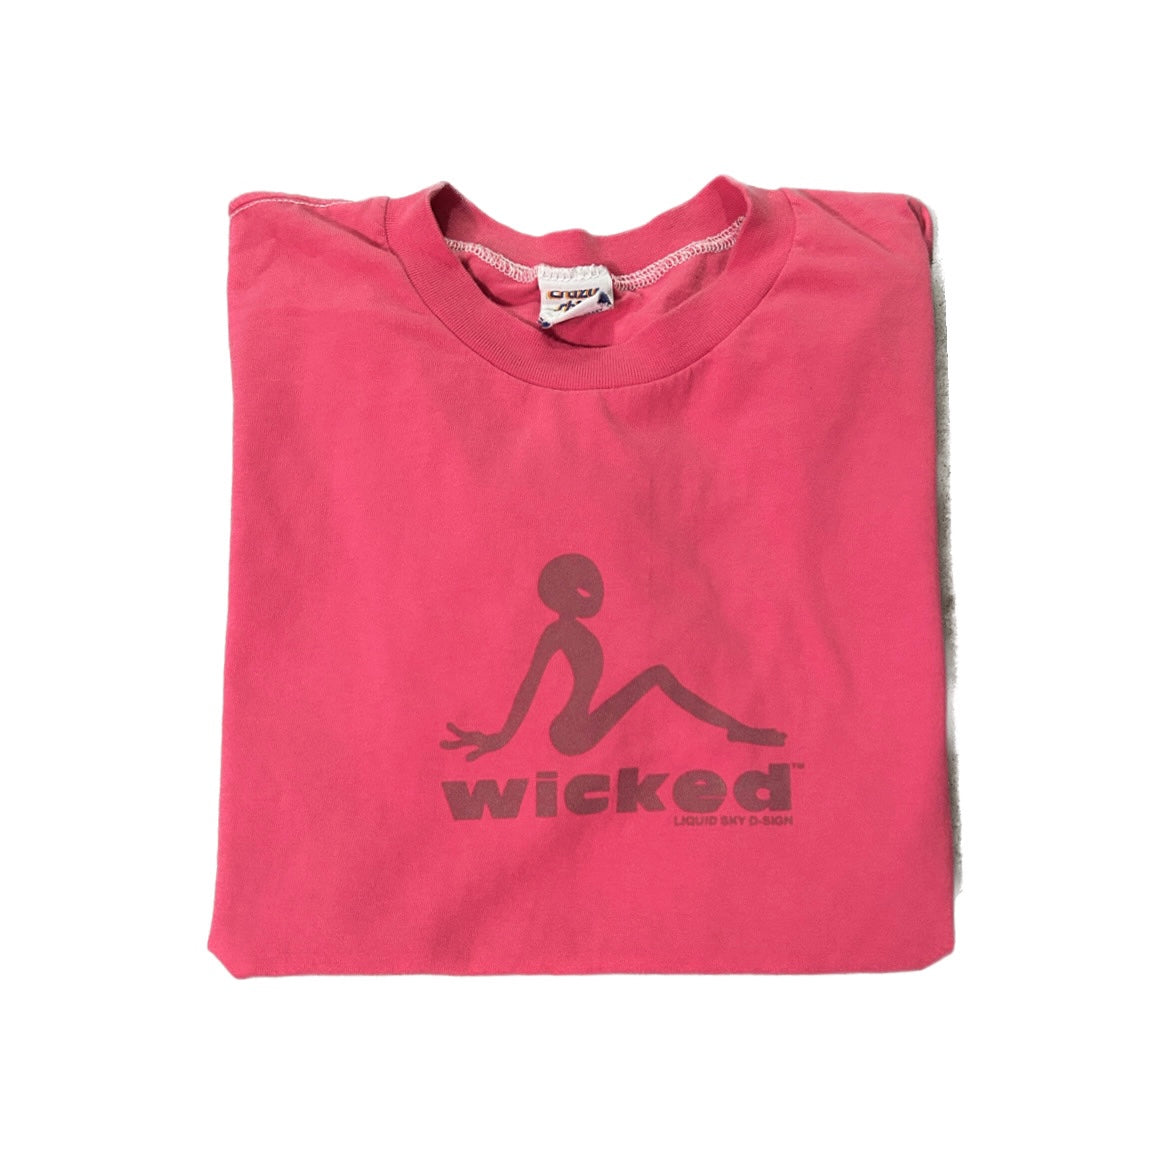 WICKED upcycled -Size M